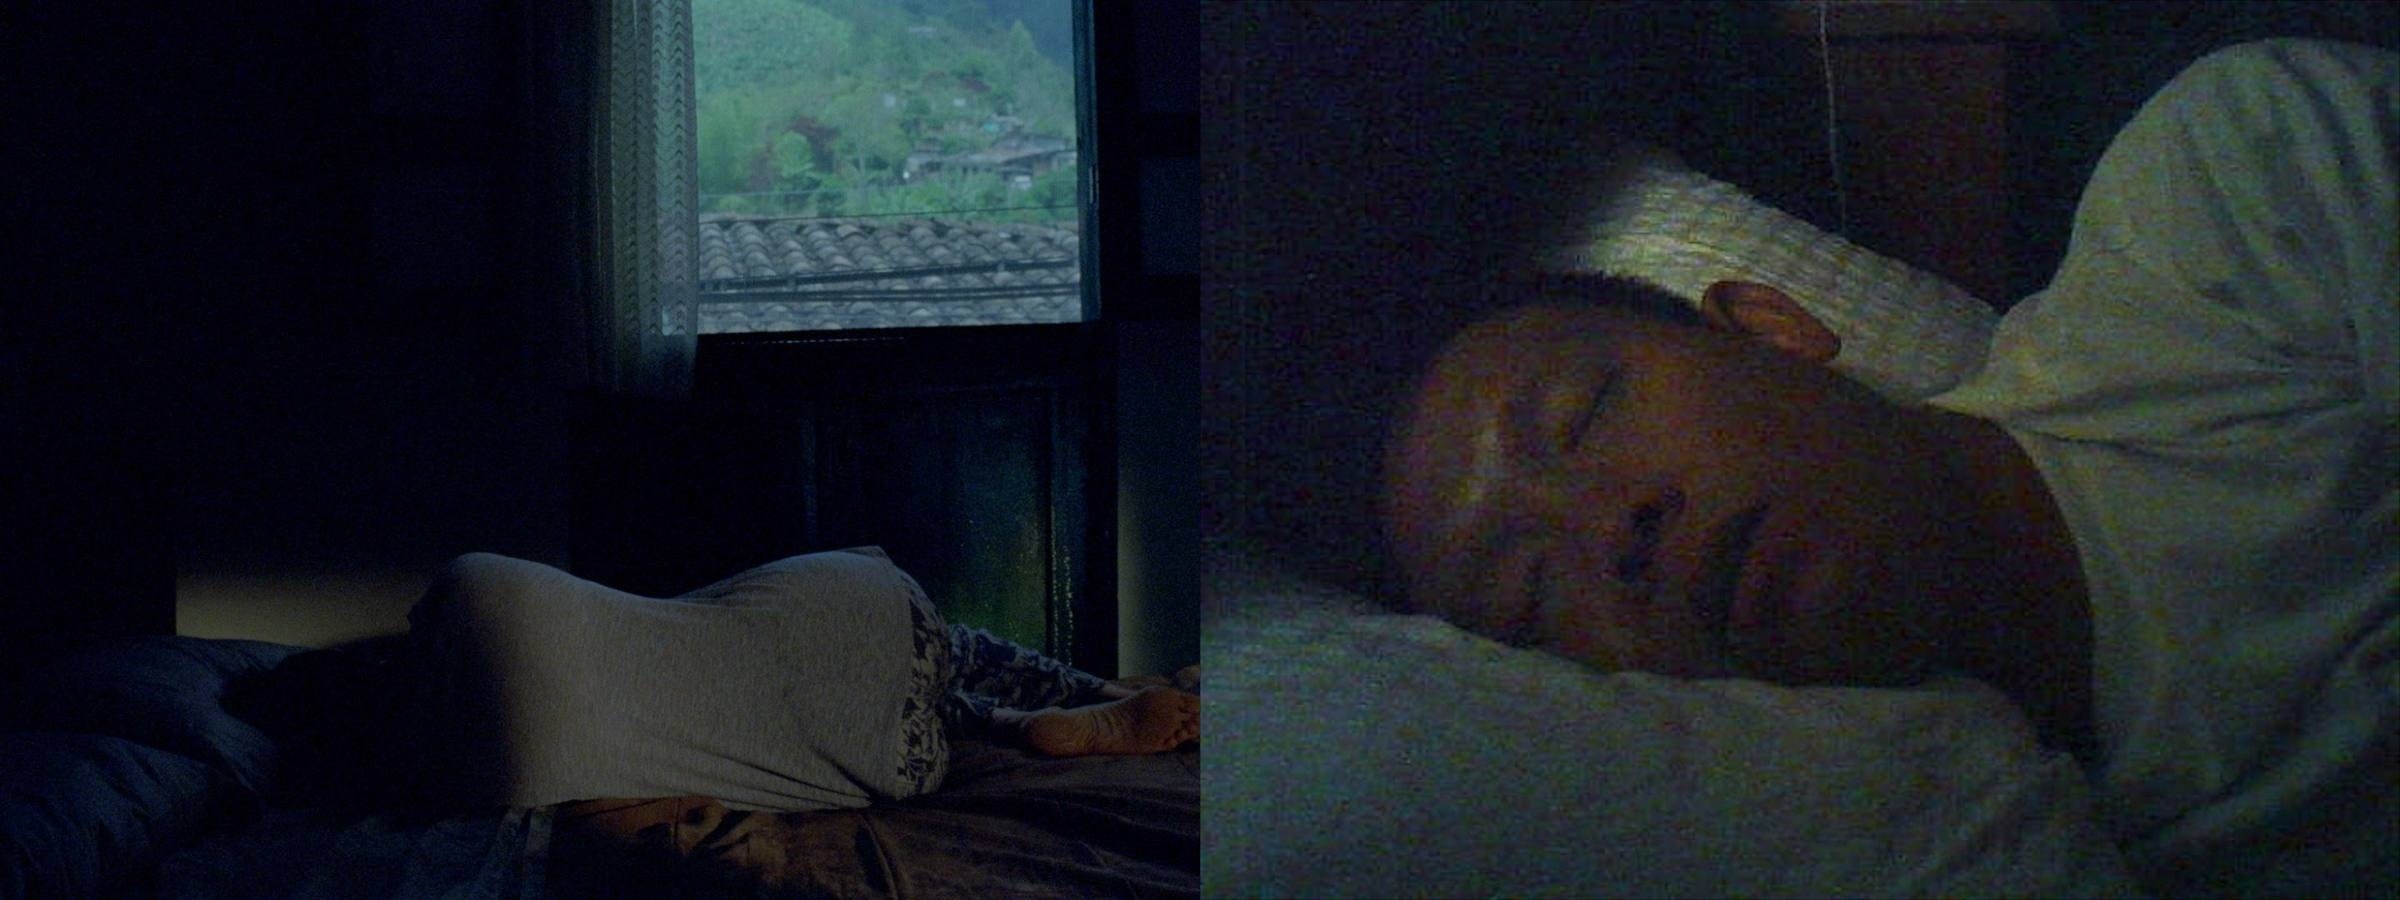 A split screen projection. On the left we can see a person sleeping with their back to us, on the right we can see another person sleeping